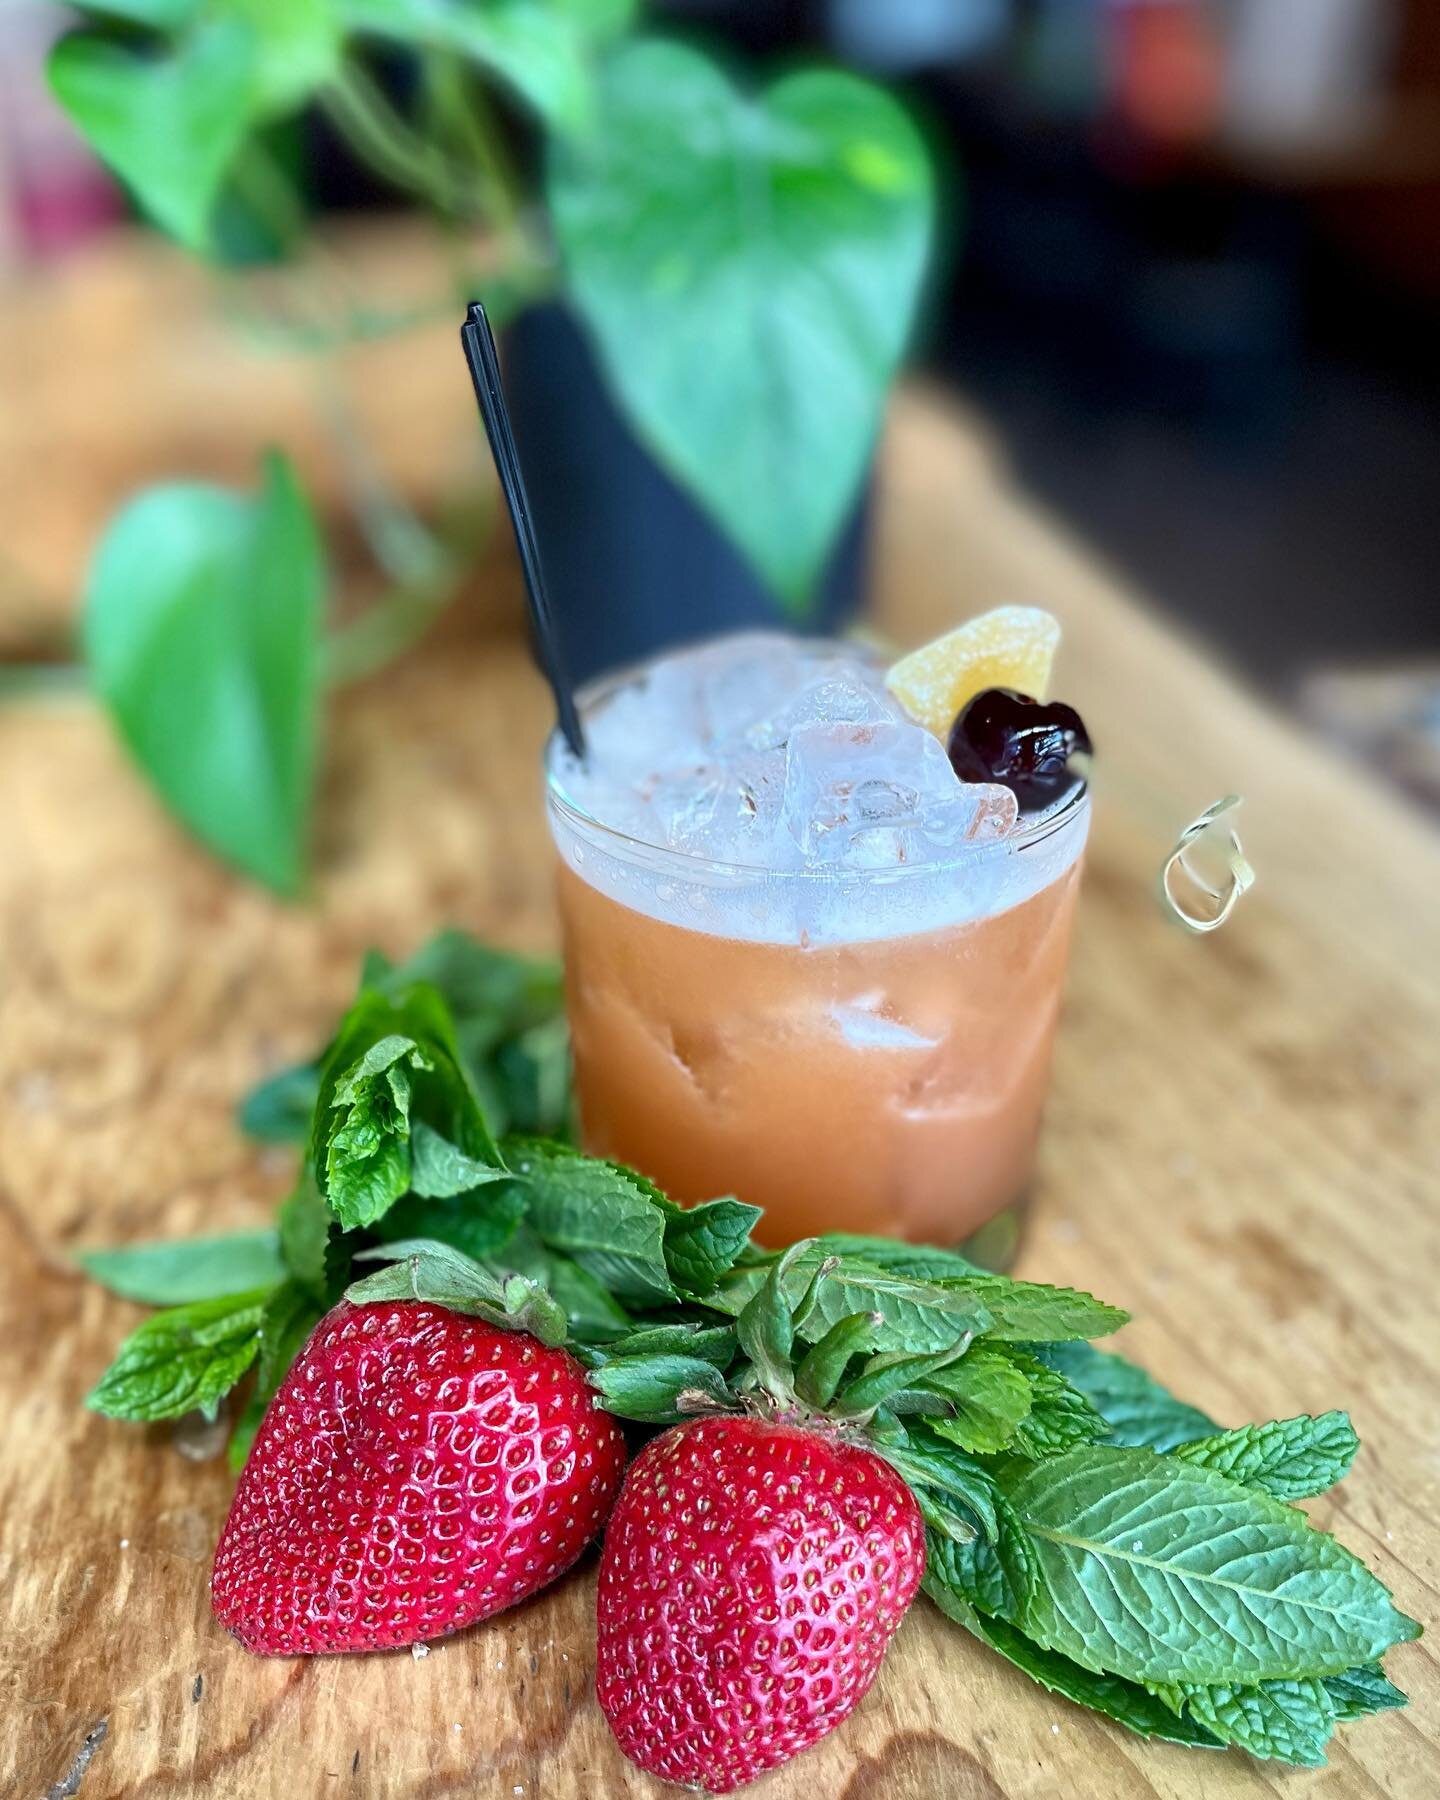 🎉NEW COCKTAIL🎉
We get by with a little help from our friends, right? This bomb collaboration with @yeahdudehella came out beautifully! Introducing&hellip;
ROYAL MAYBE
Inspired from the almighty Pimms Cup, this drink features; house-infused strawber